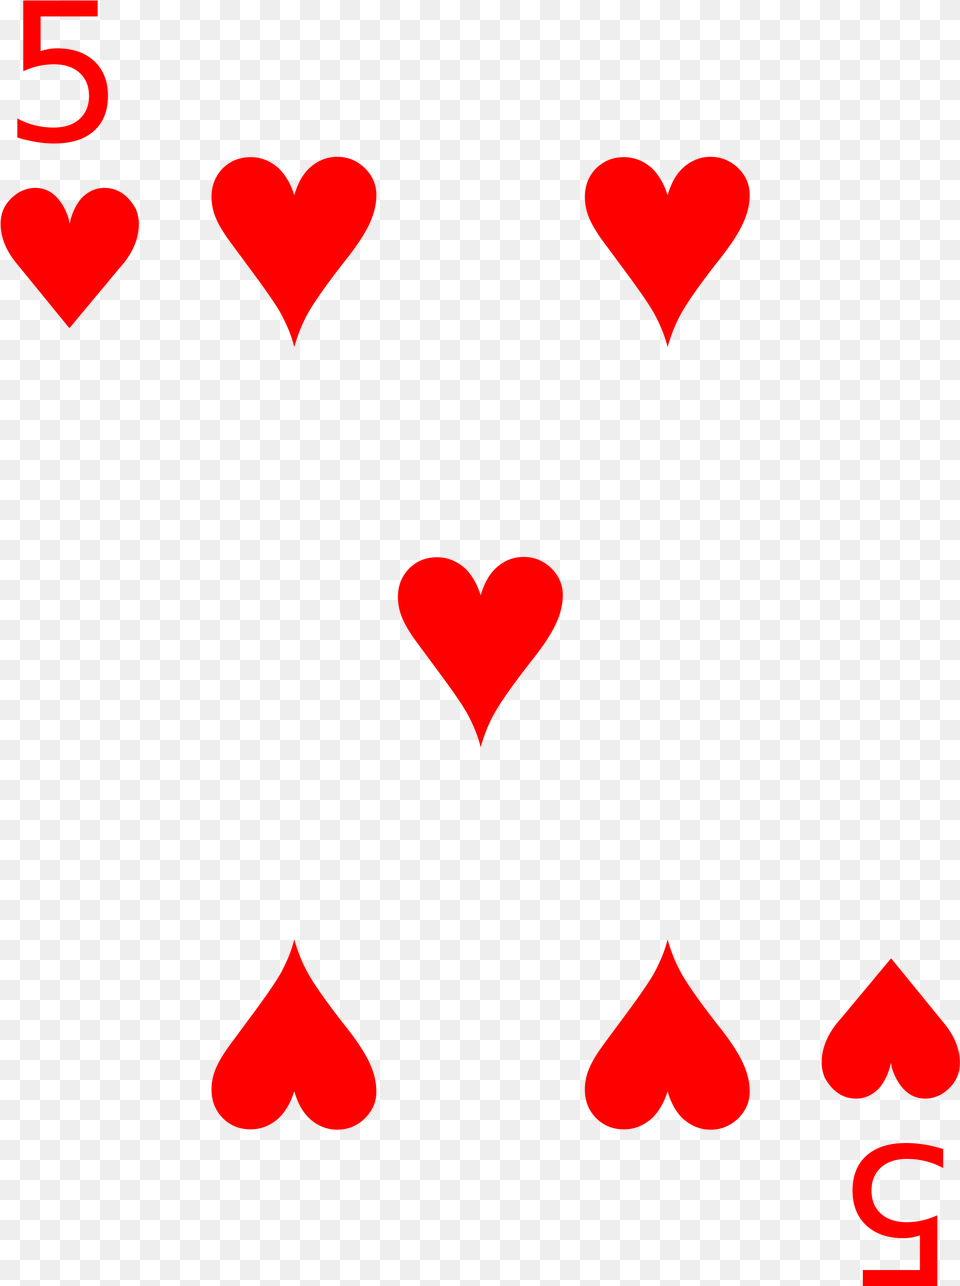 File Cards Heart Wikimedia Commons Open 5 Heart Cards Png